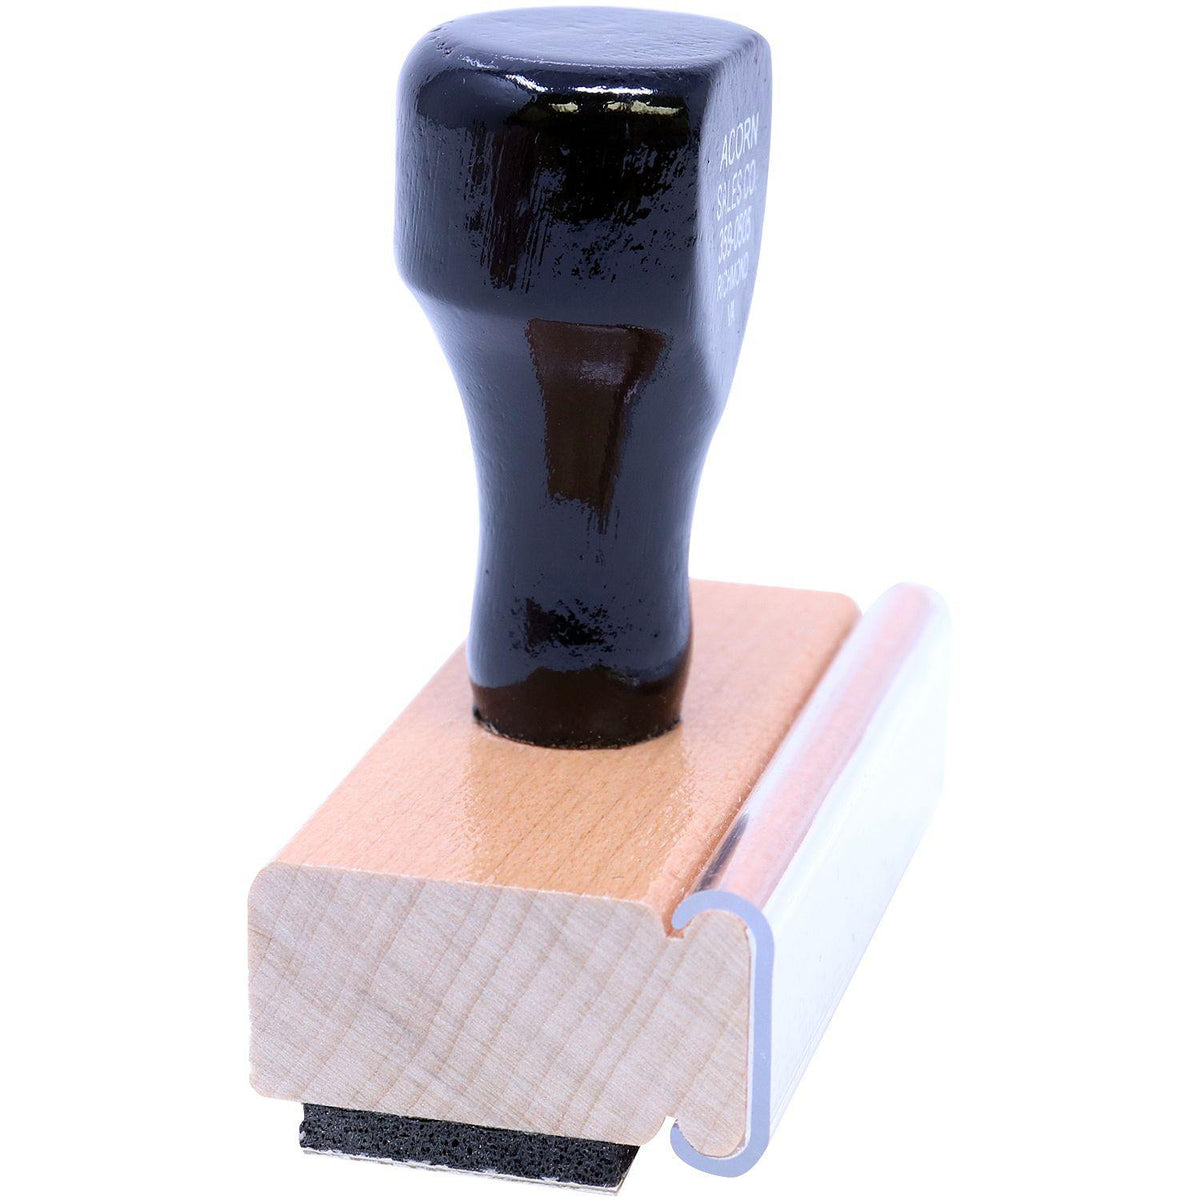 Side View of Large For Deposit Only with Line Rubber Stamp at an Angle